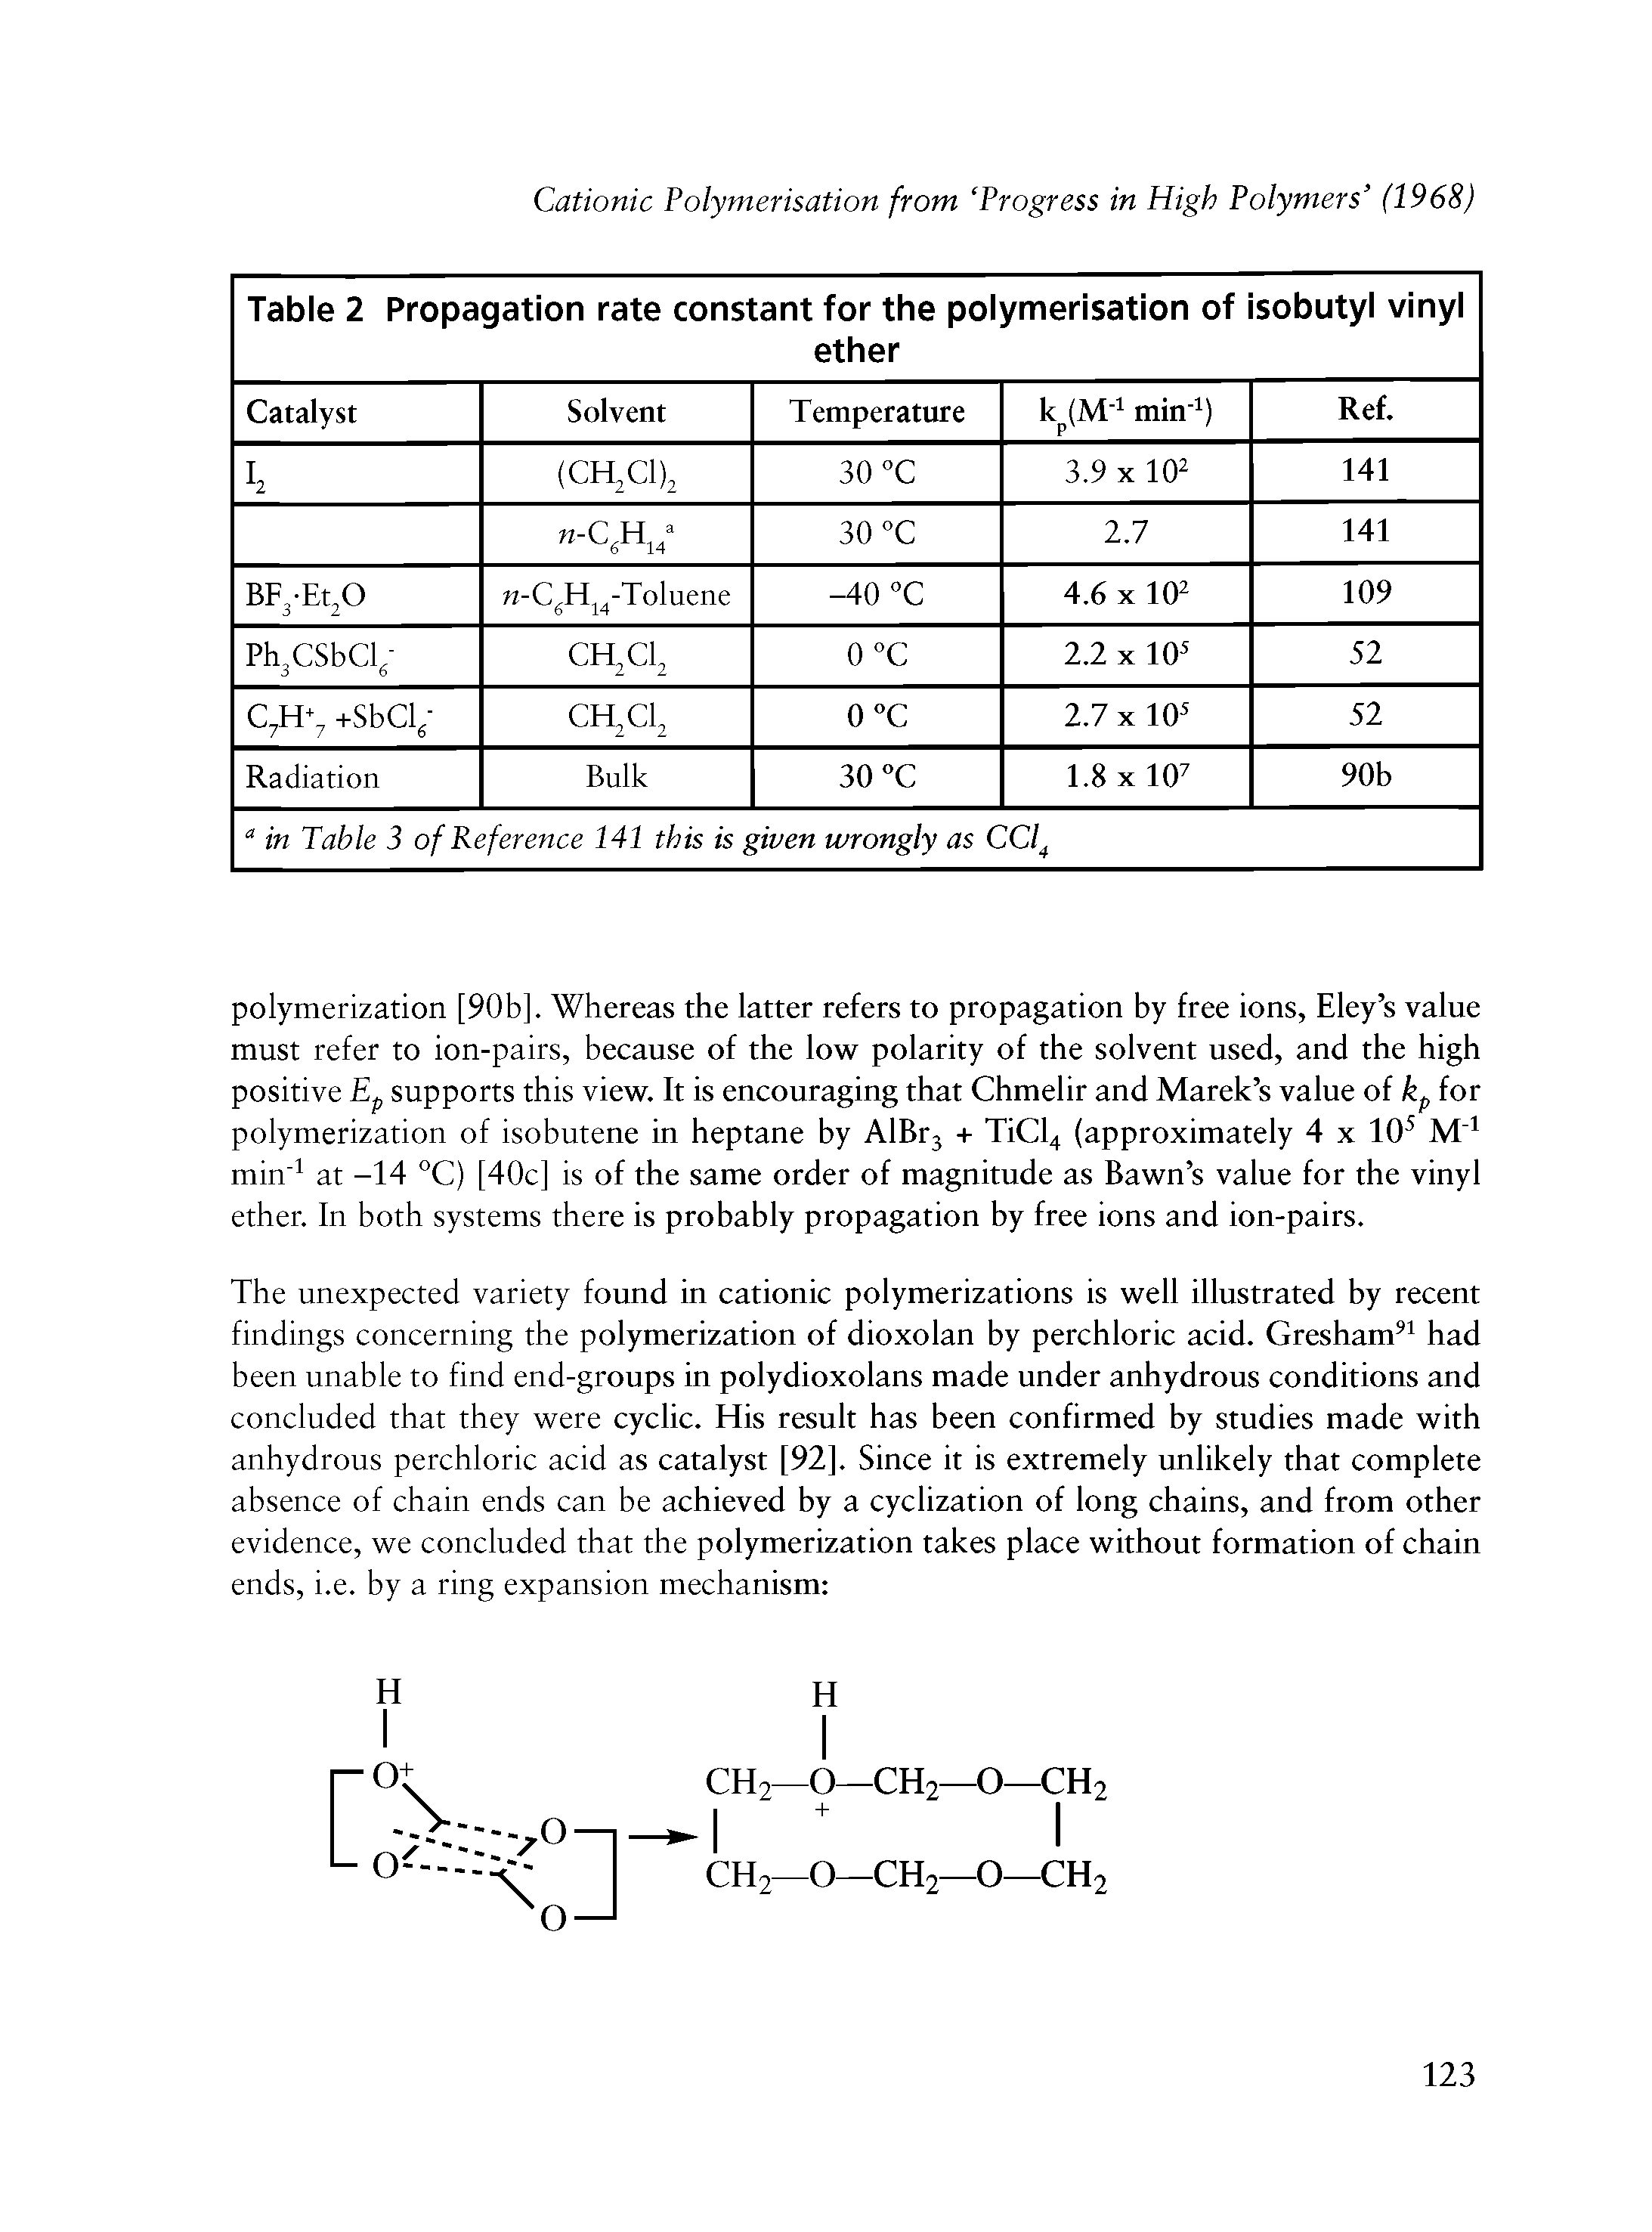 Table 2 Propagation rate constant for the polymerisation of isobutyl vinyl ether ...